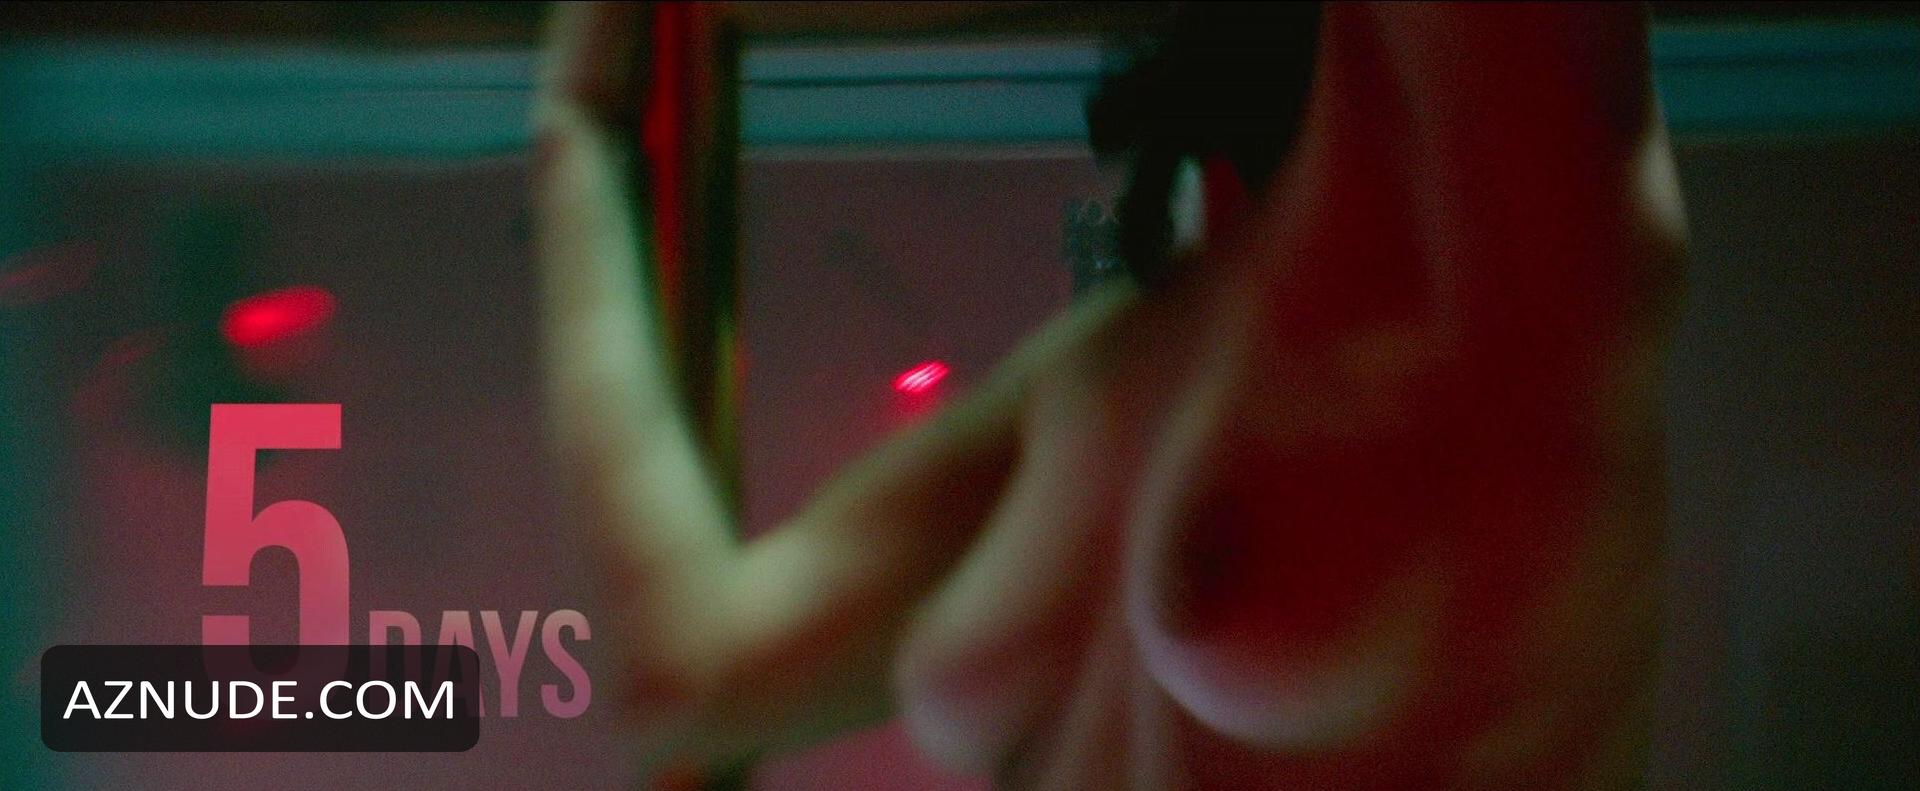 Browse Celebrity Stripper Pole Images Page 7 Aznude 